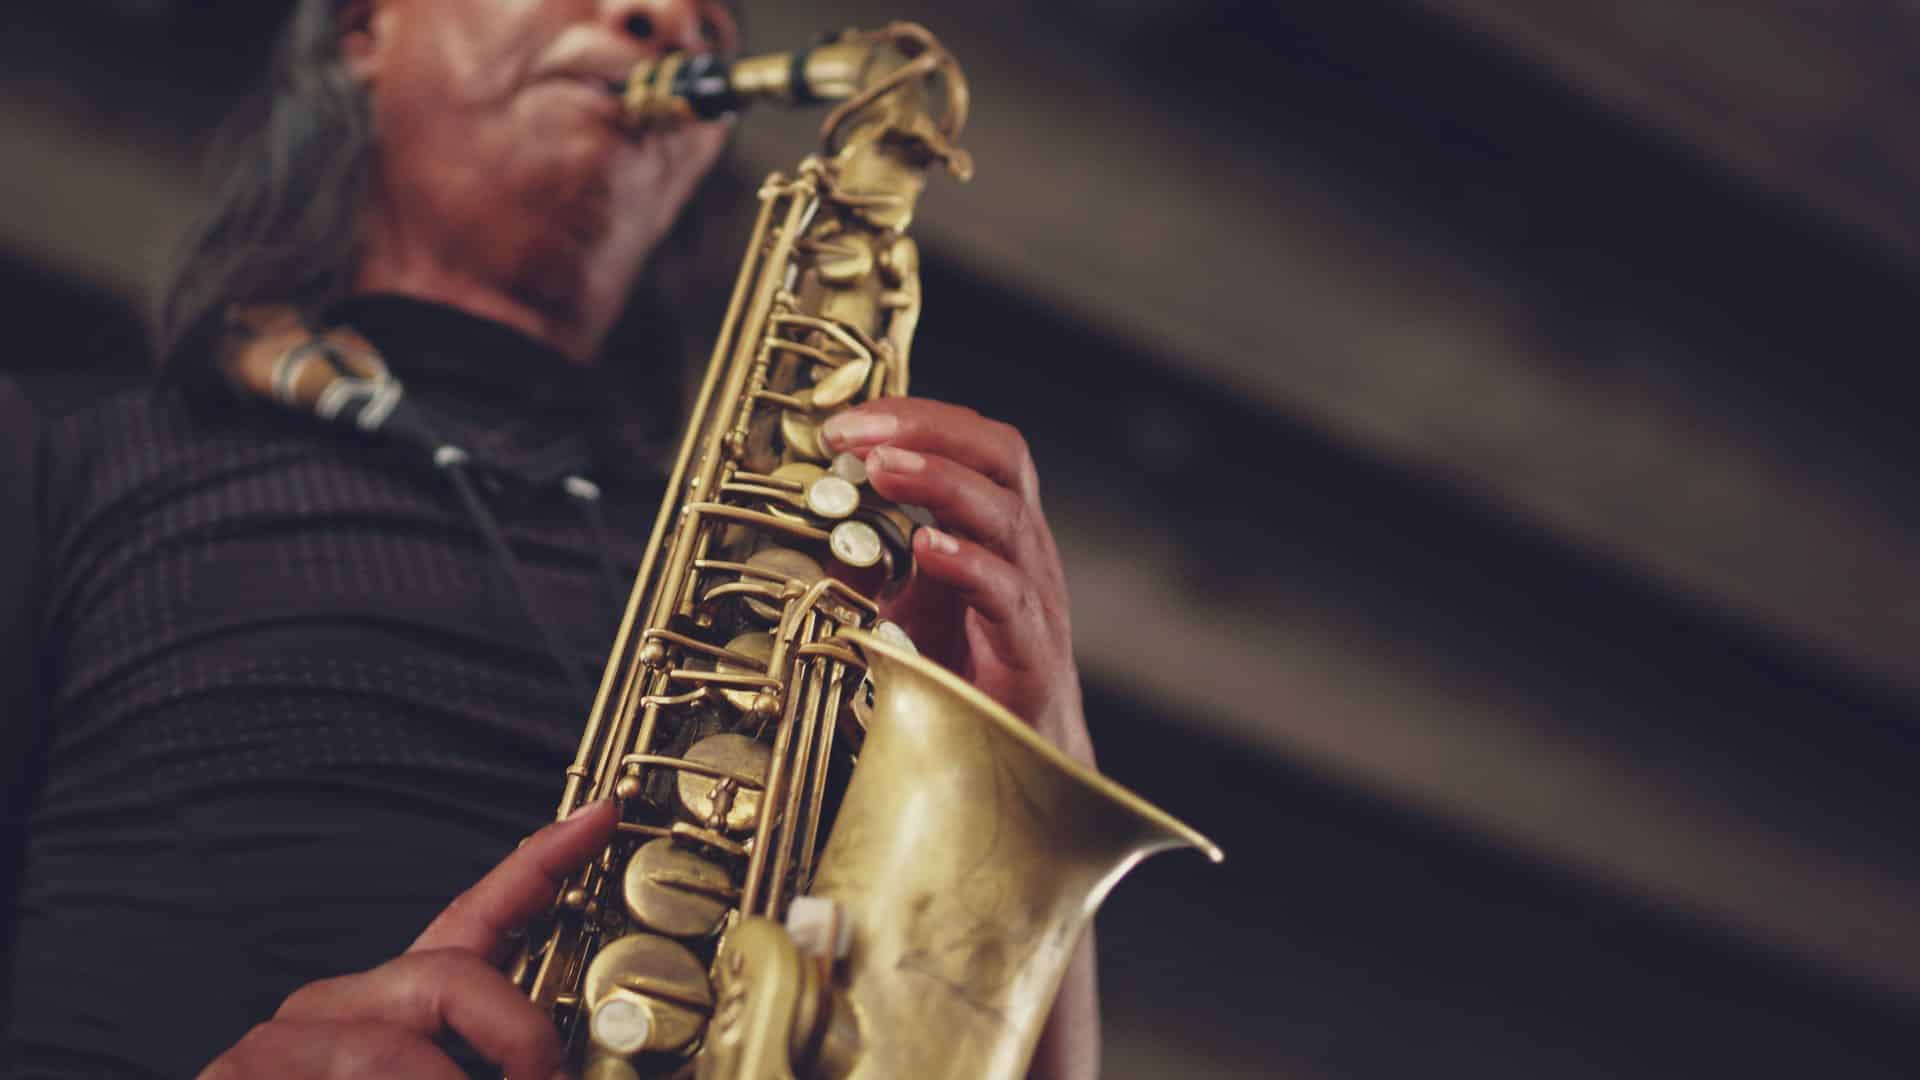 Close up view of man playing a saxophone